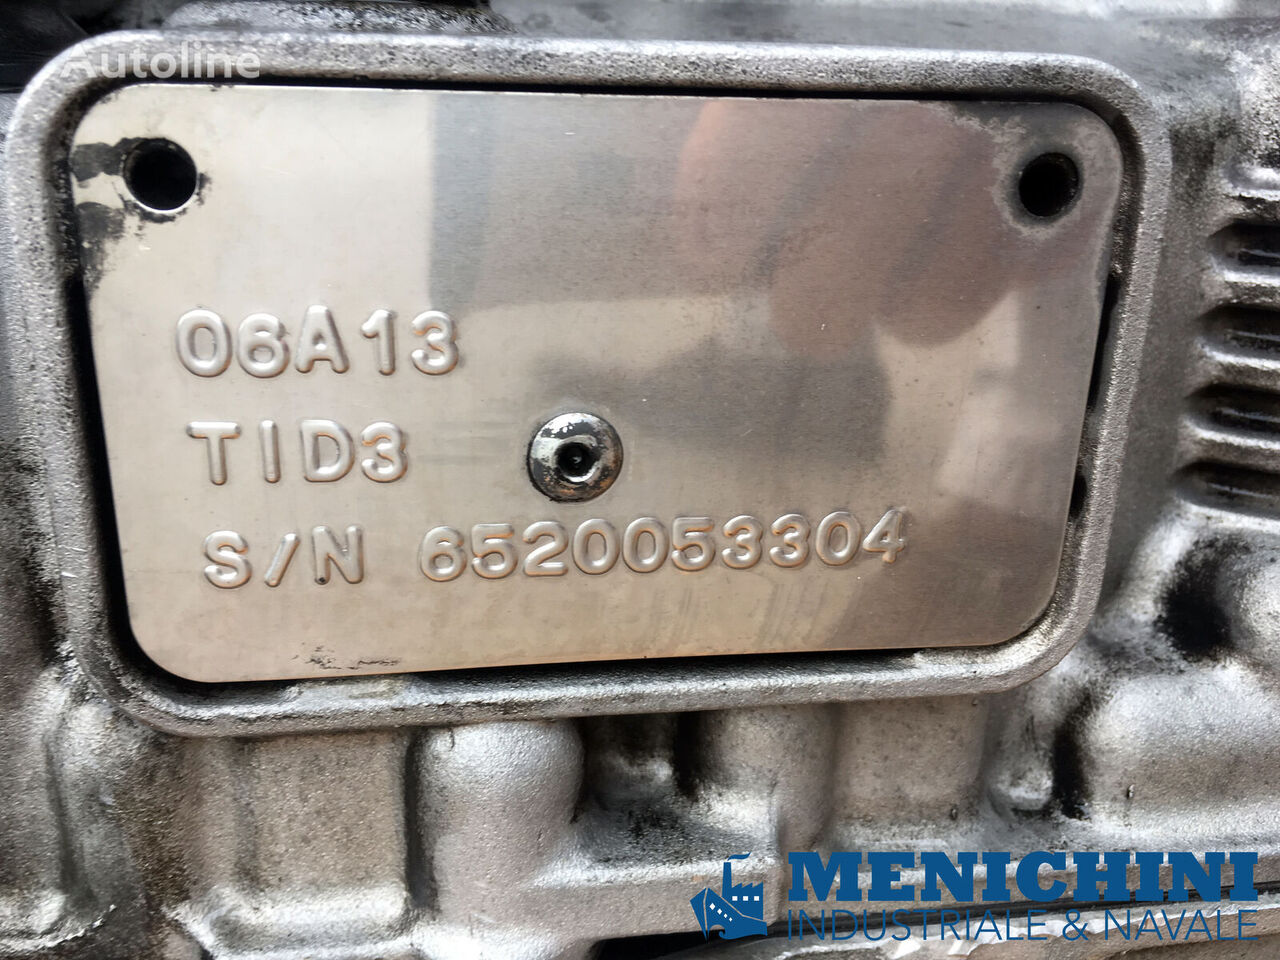 Allison TID003 gearbox for truck